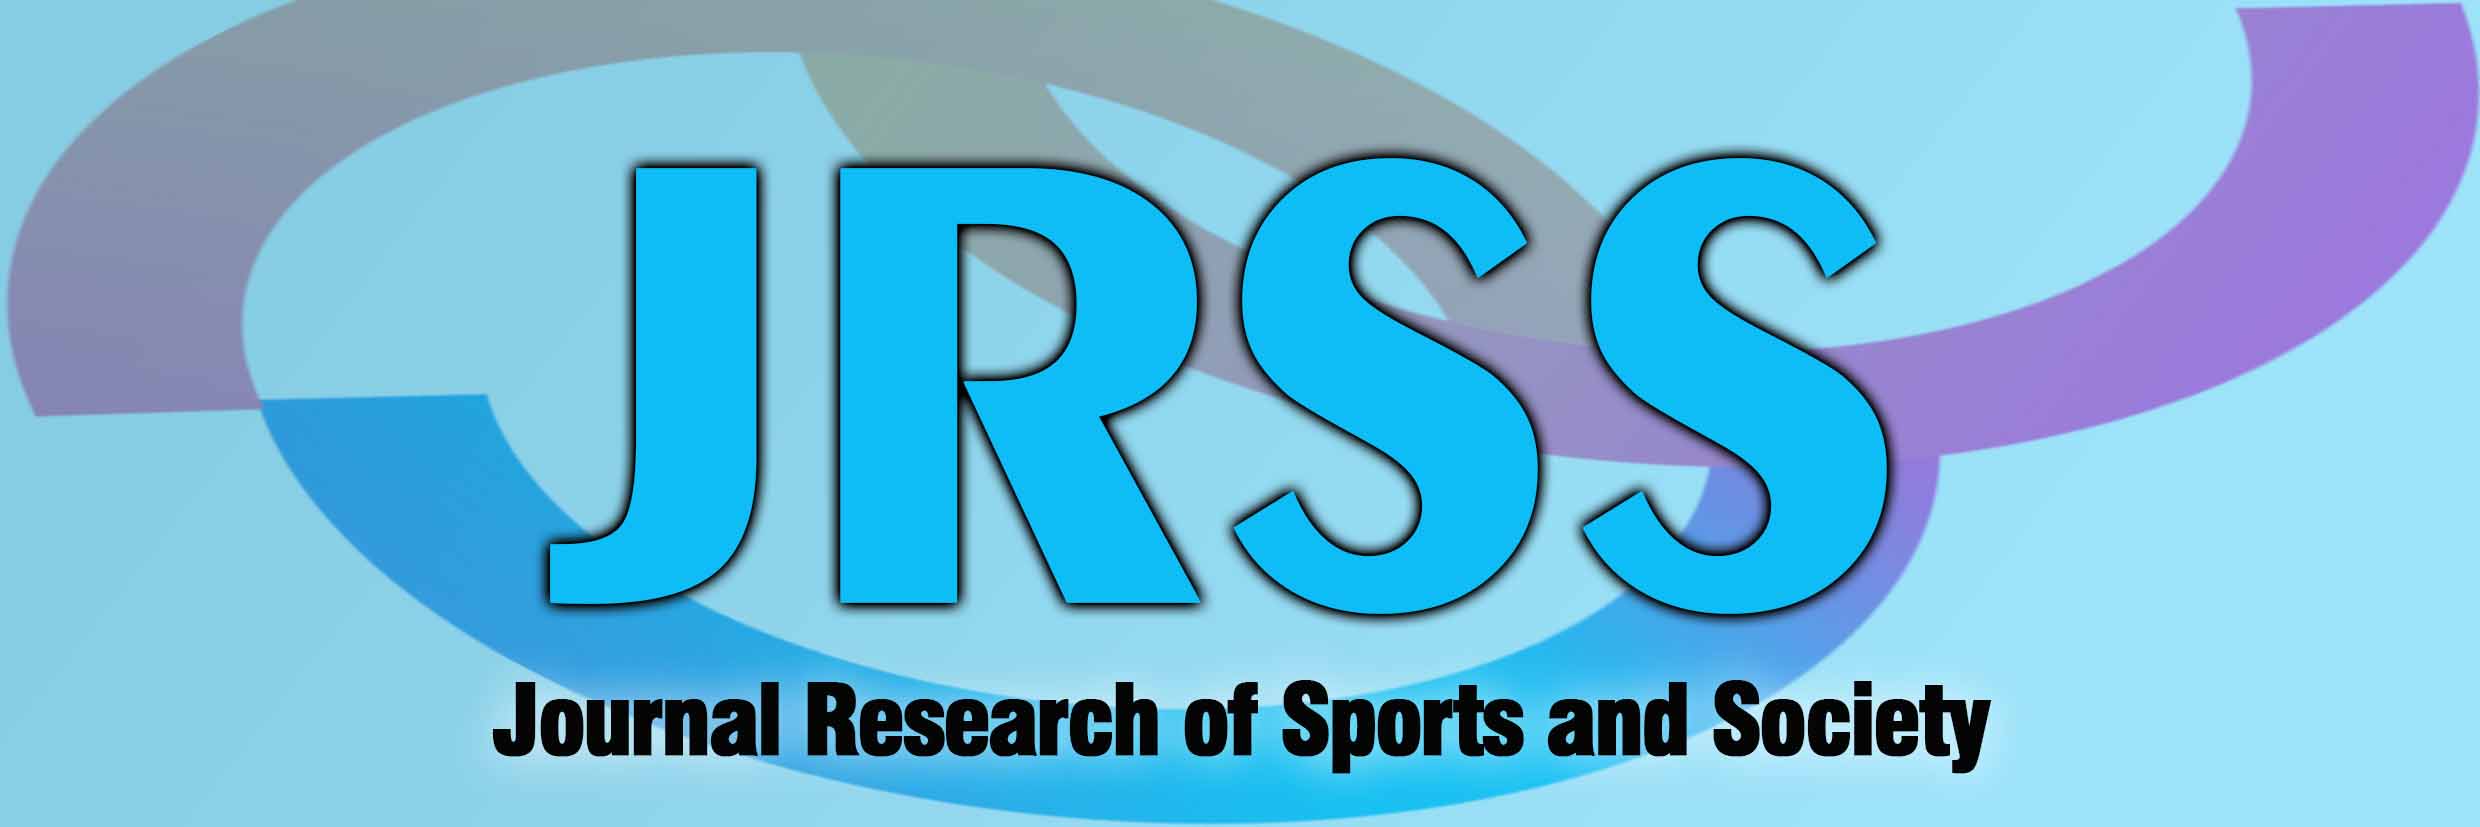 JRSS: Journal Research of Sports and Society